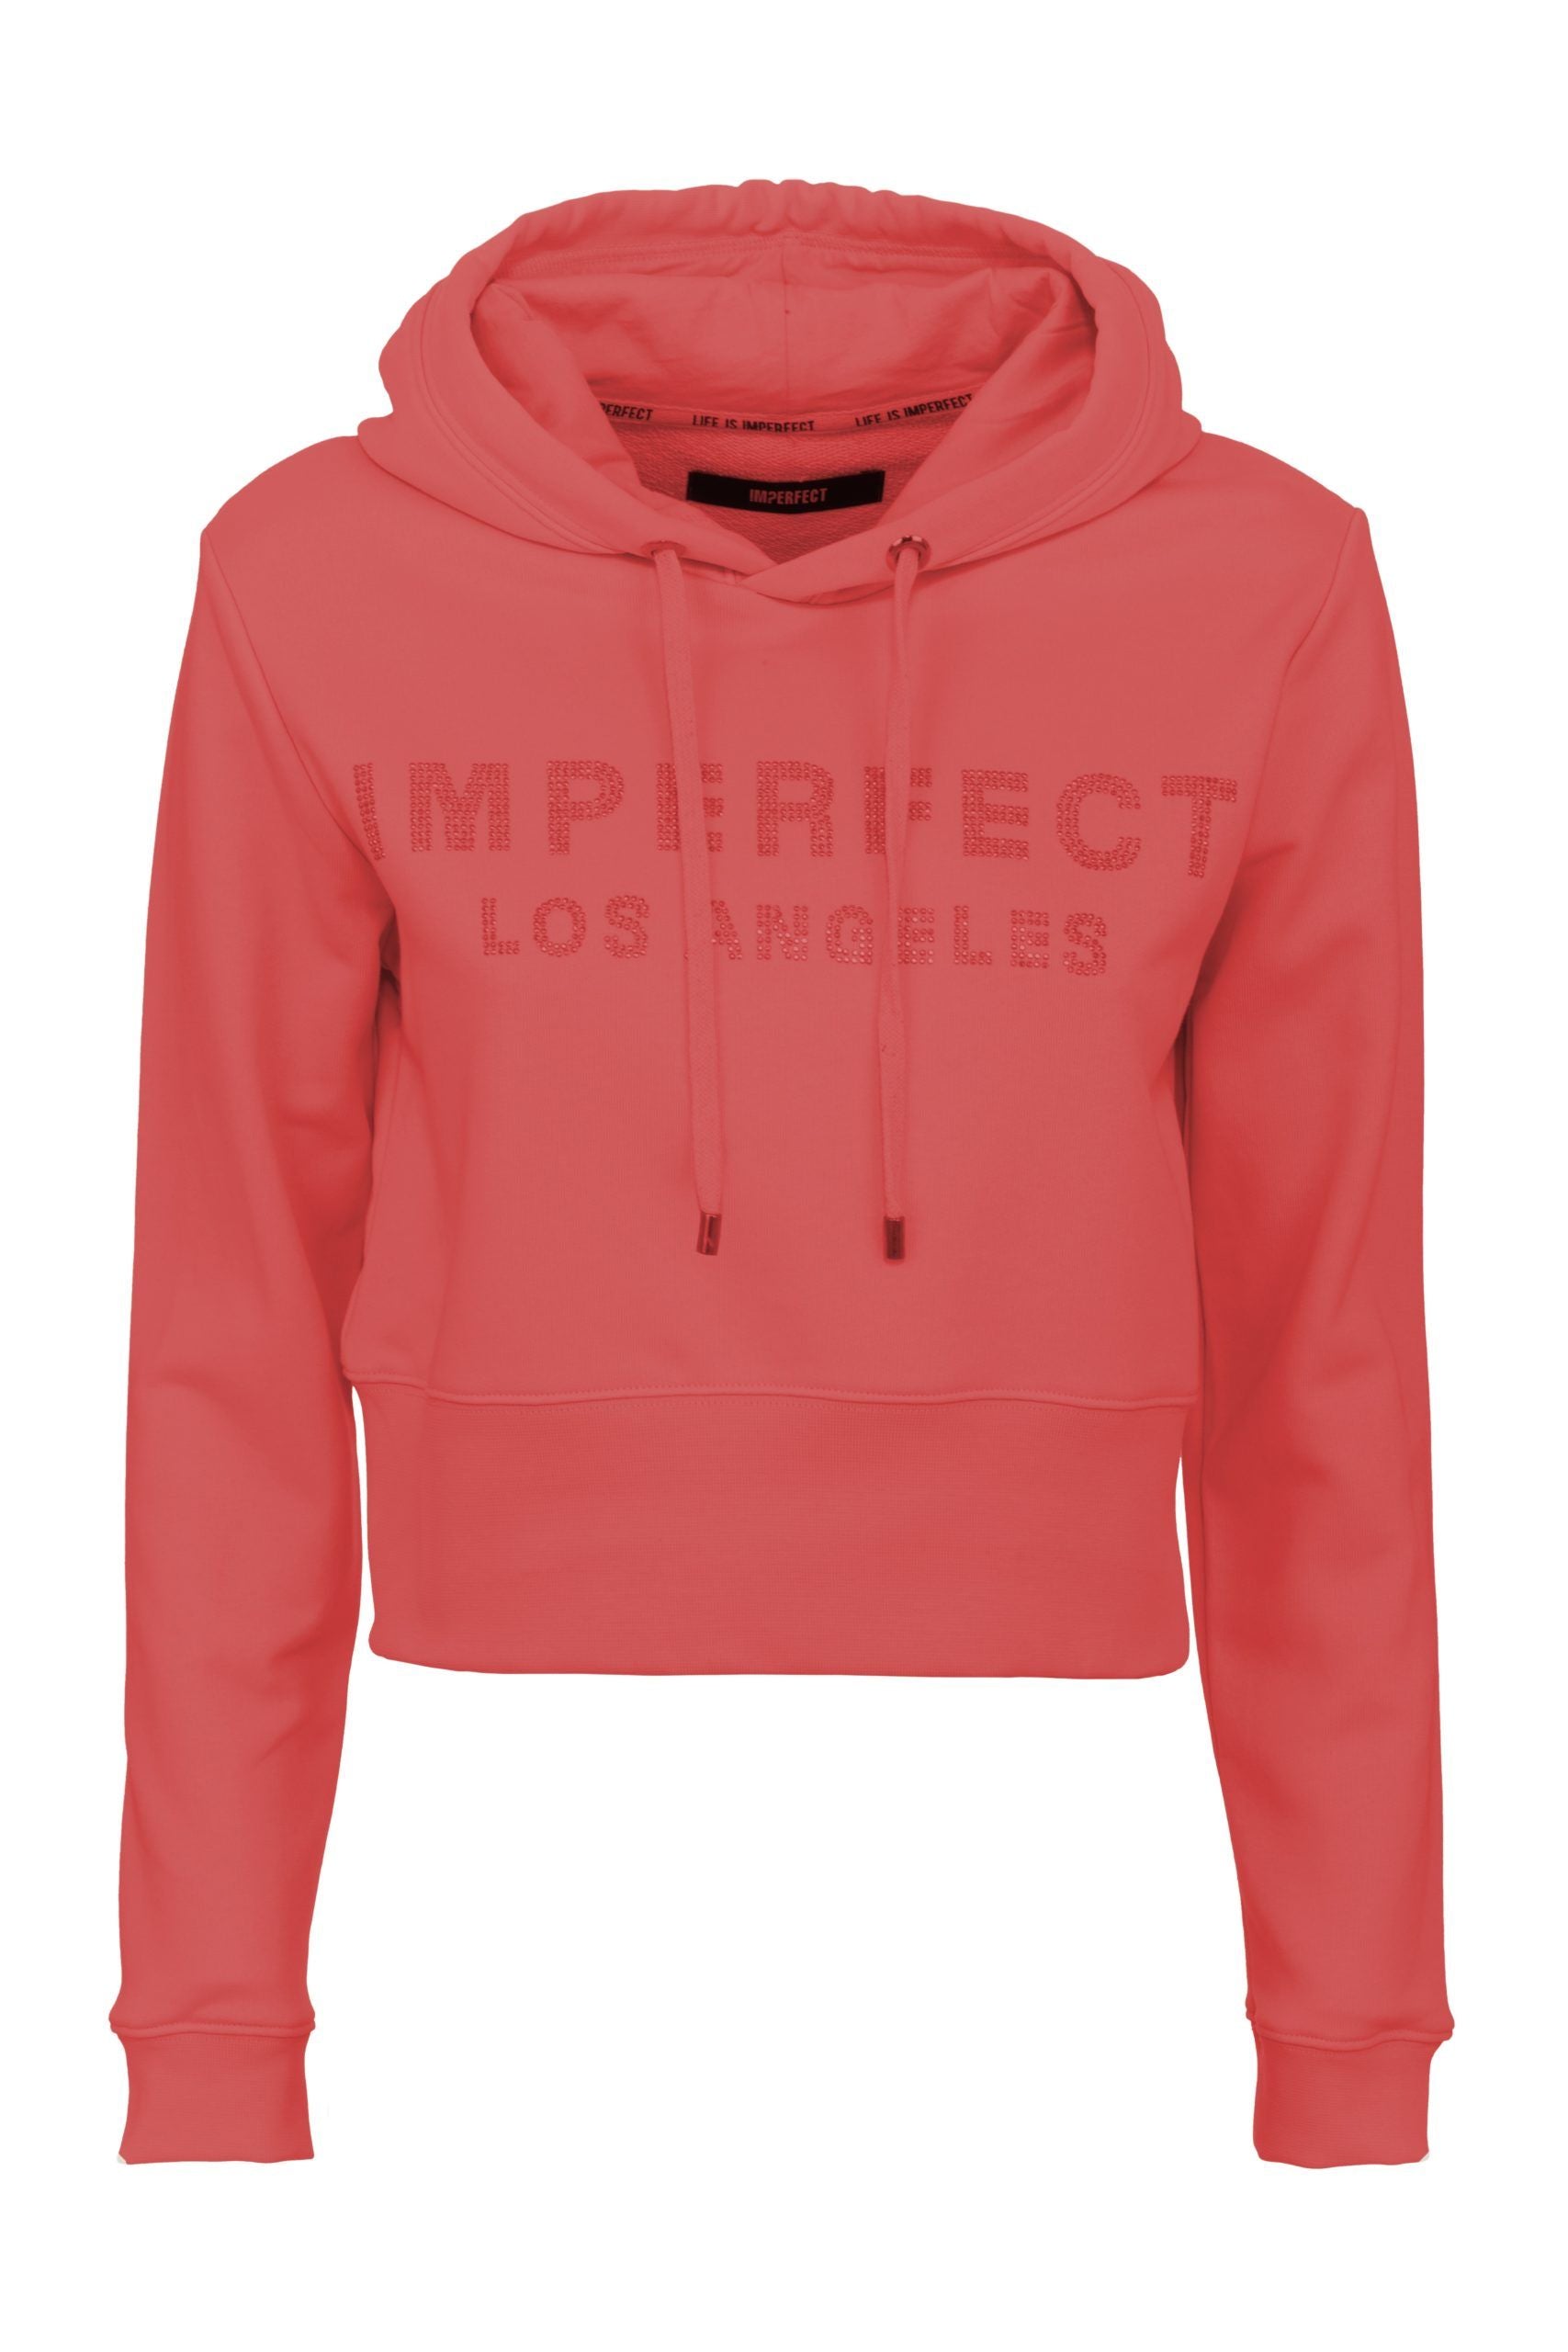 Imperfect Women's Red Cotton Short Hoodie Sweater - Designed by Imperfect Available to Buy at a Discounted Price on Moon Behind The Hill Online Designer Discount Store